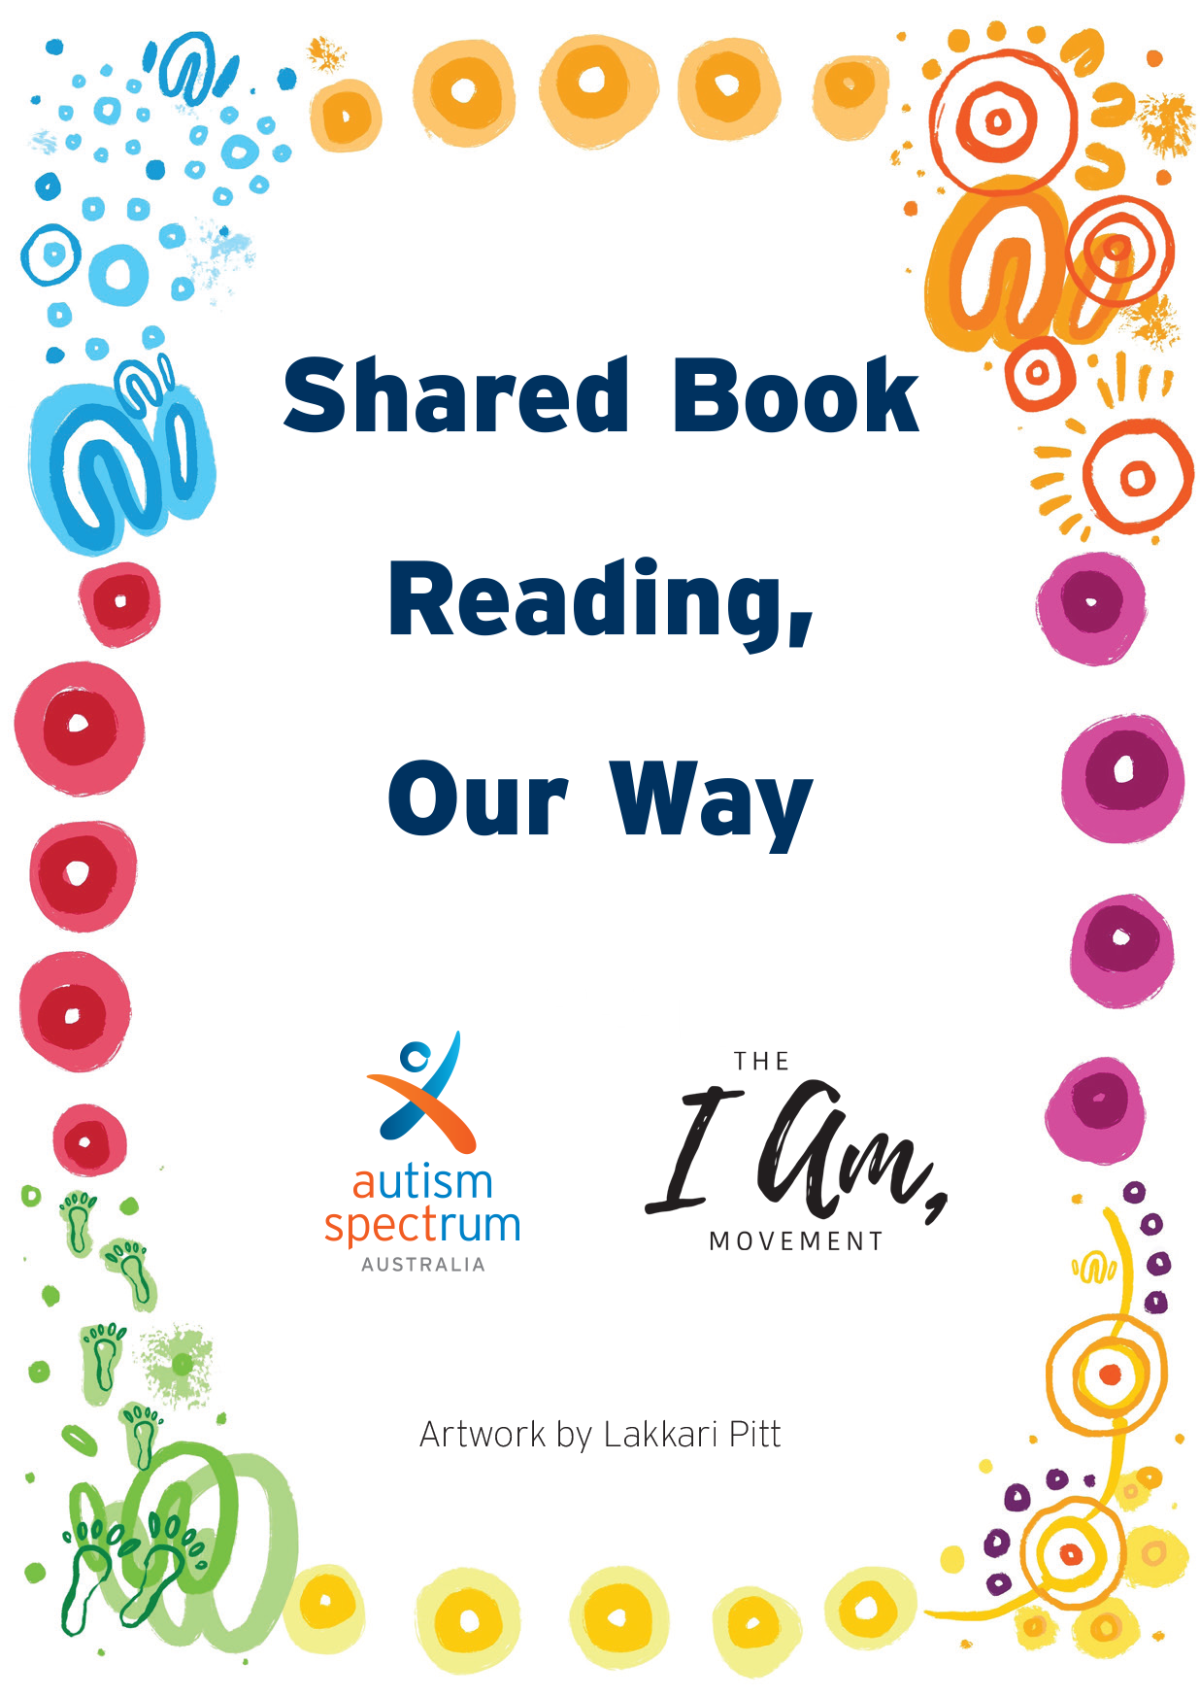 Shared Book Reading Our Way banner